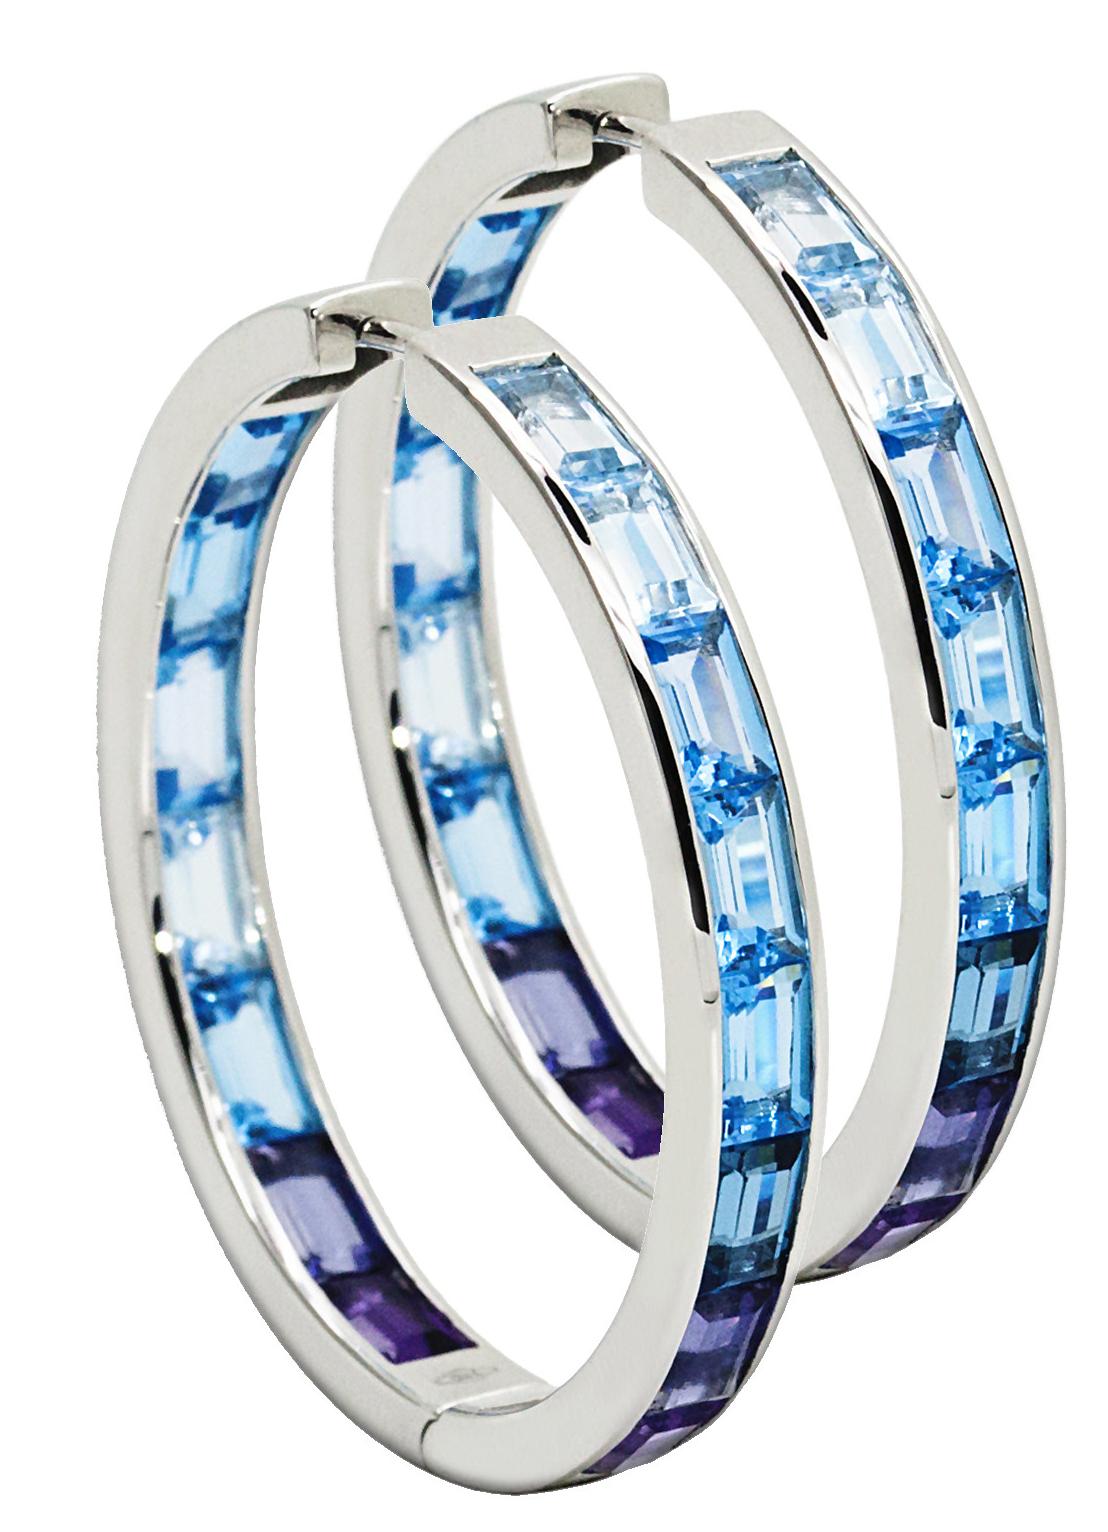 Women's Daou Sunset Sunrise Hoops Earrings White Gold and Blue Gemstones For Sale